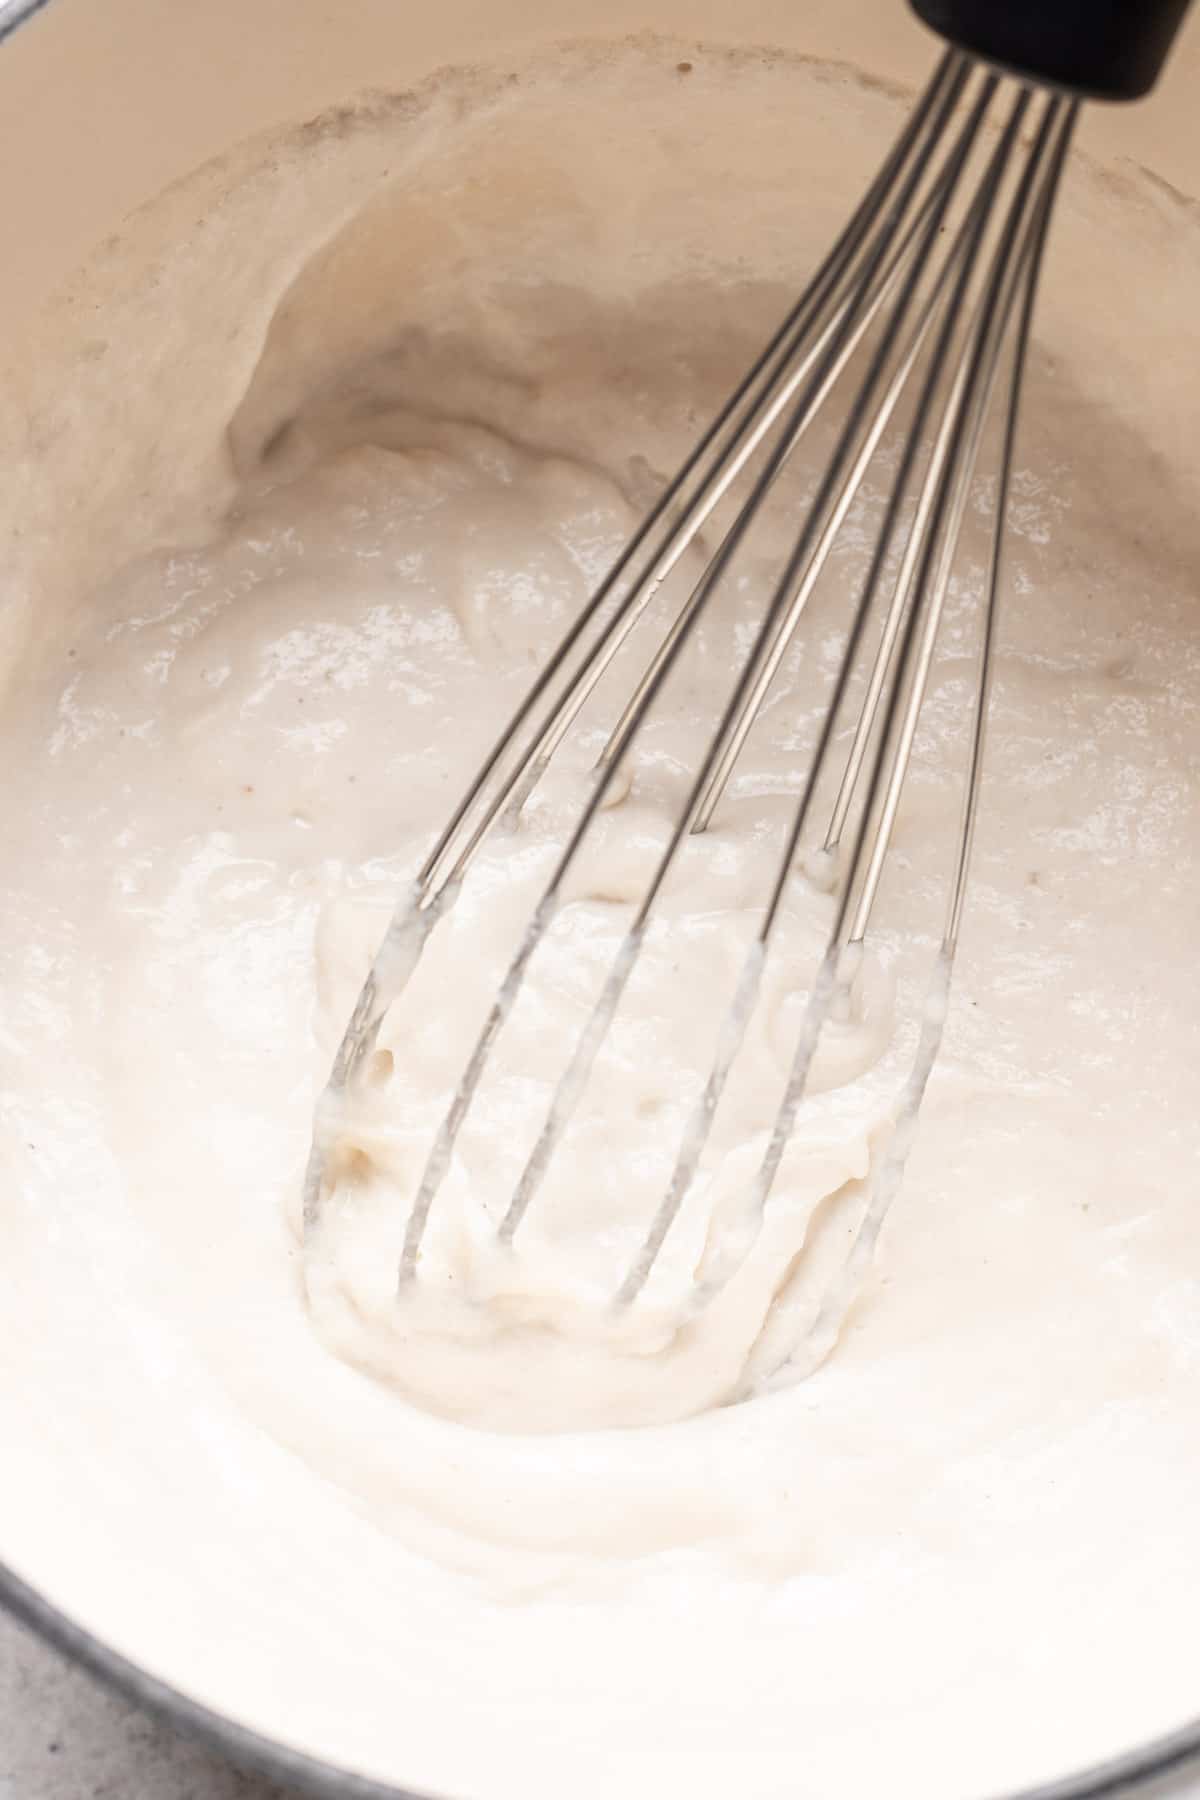 Cheese whisked until thick and stretchy.